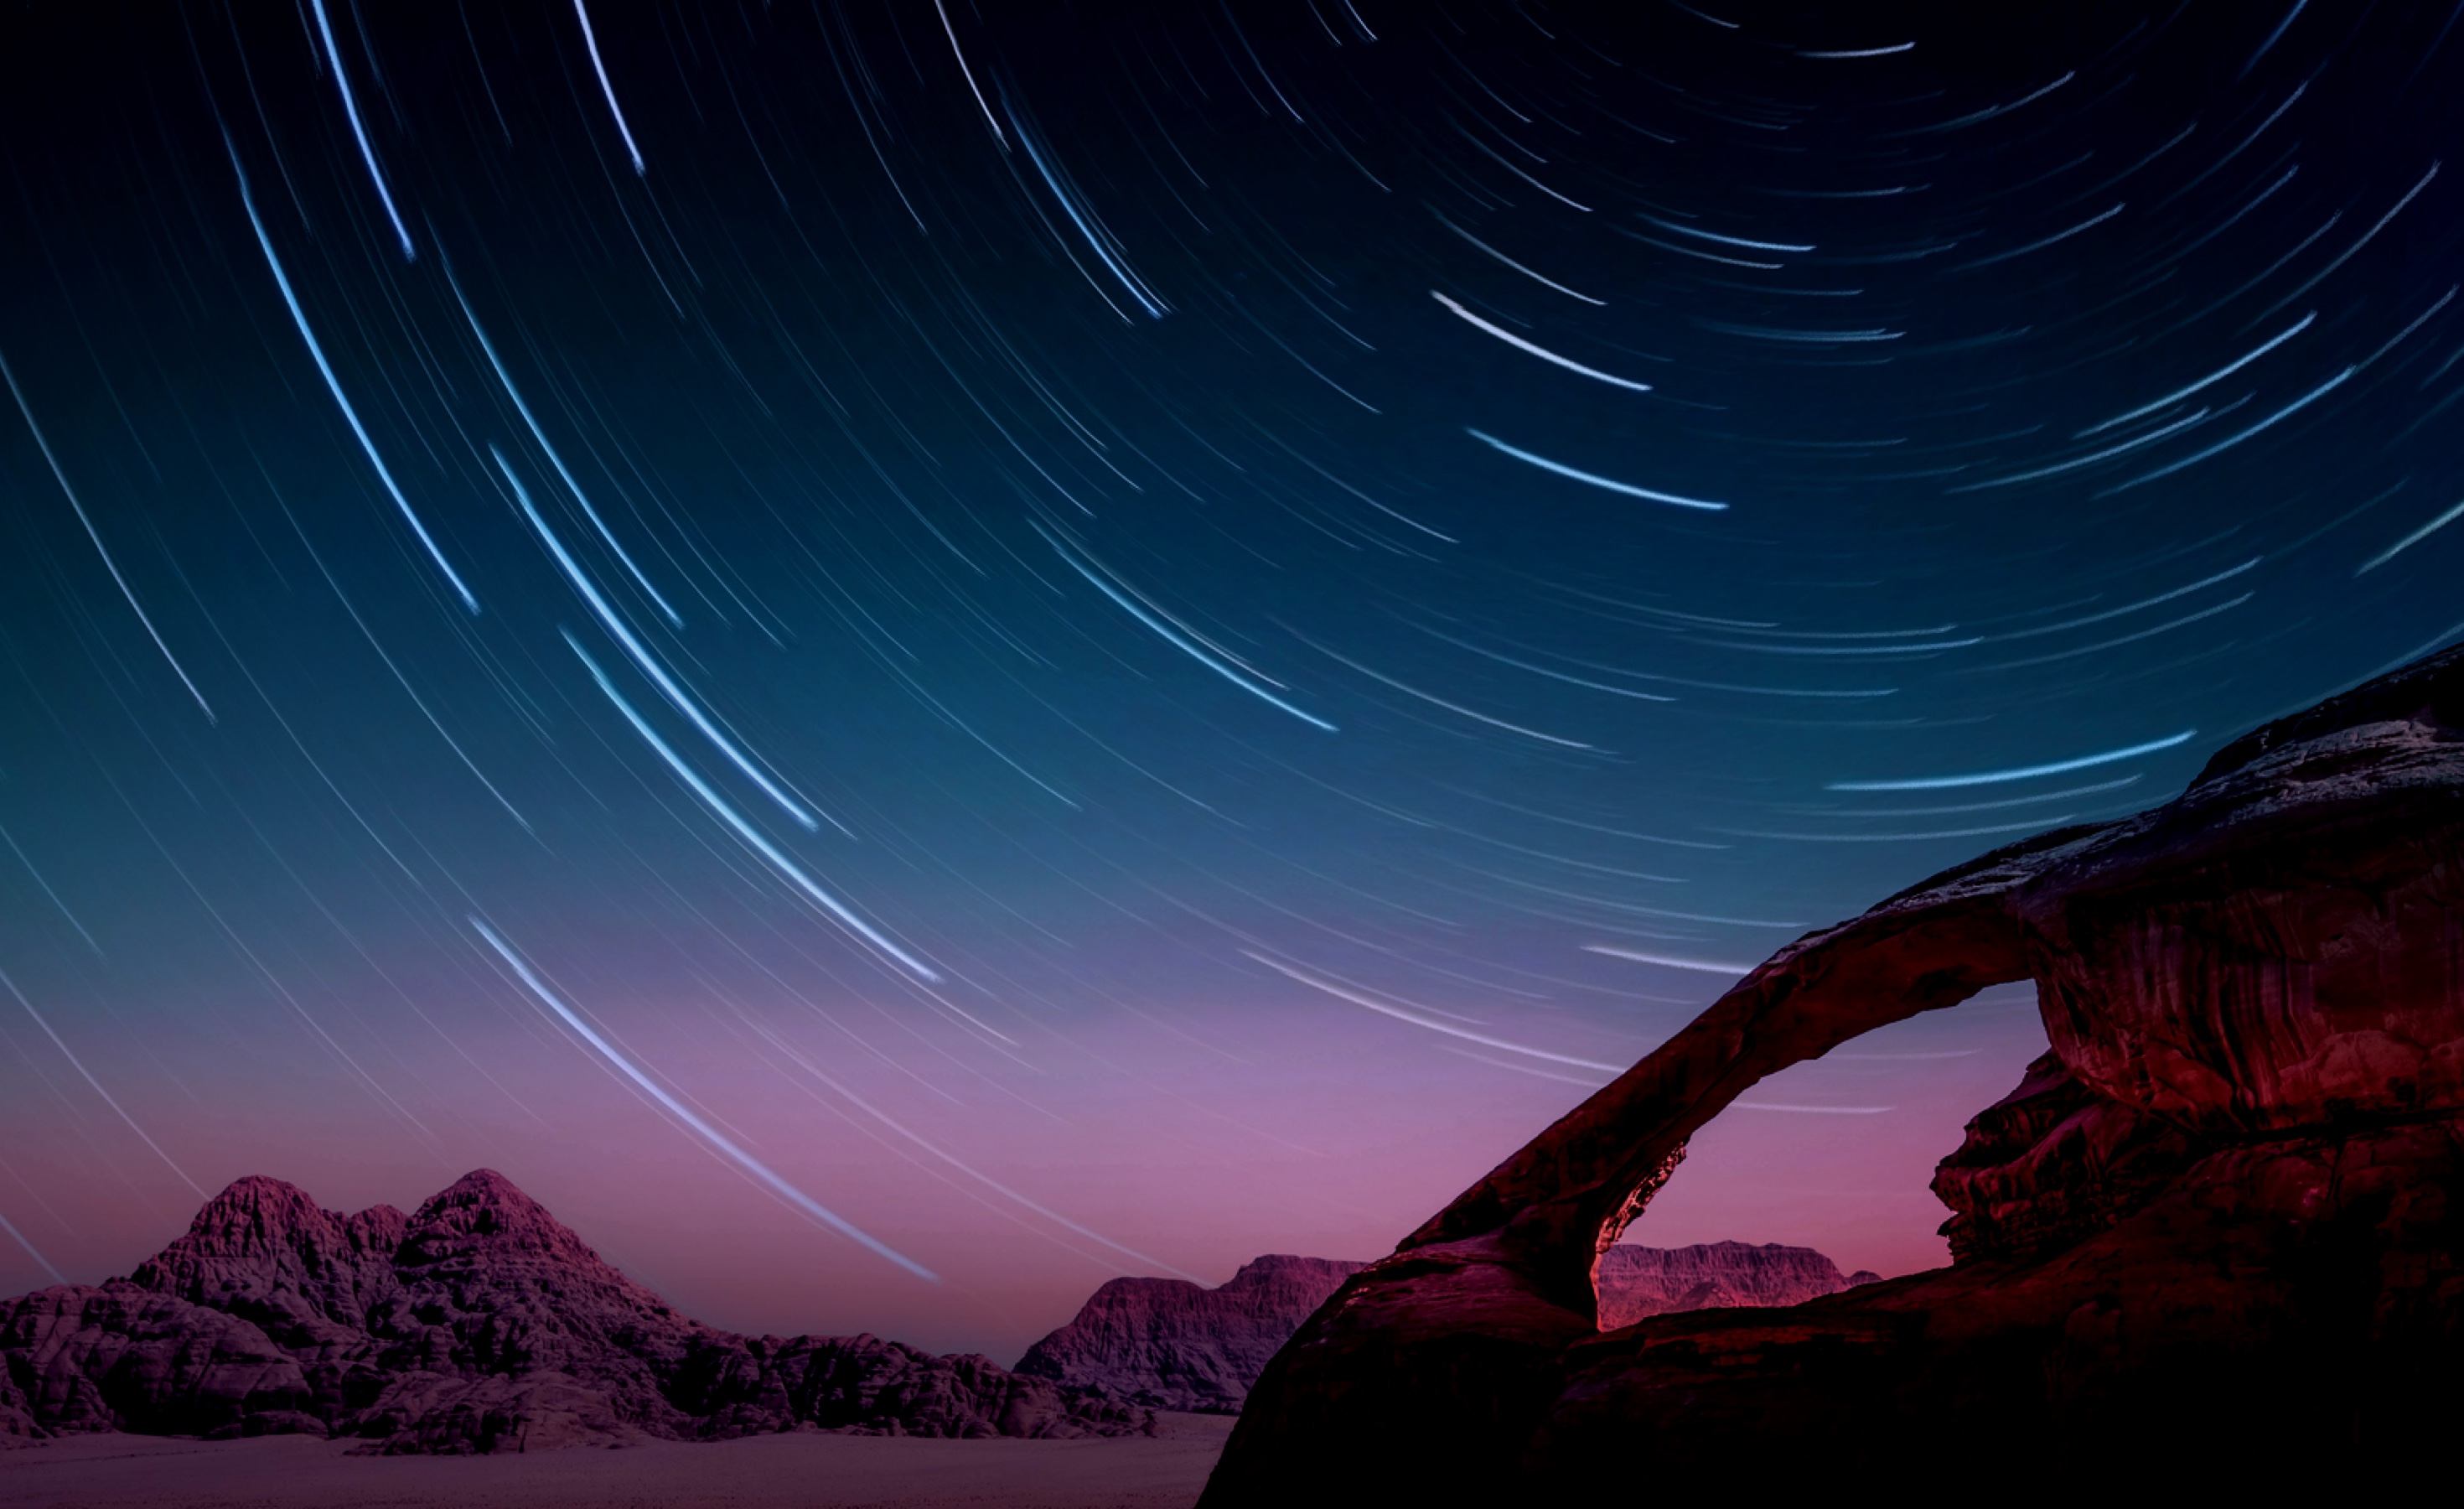 Image of mountains at dusk with stars